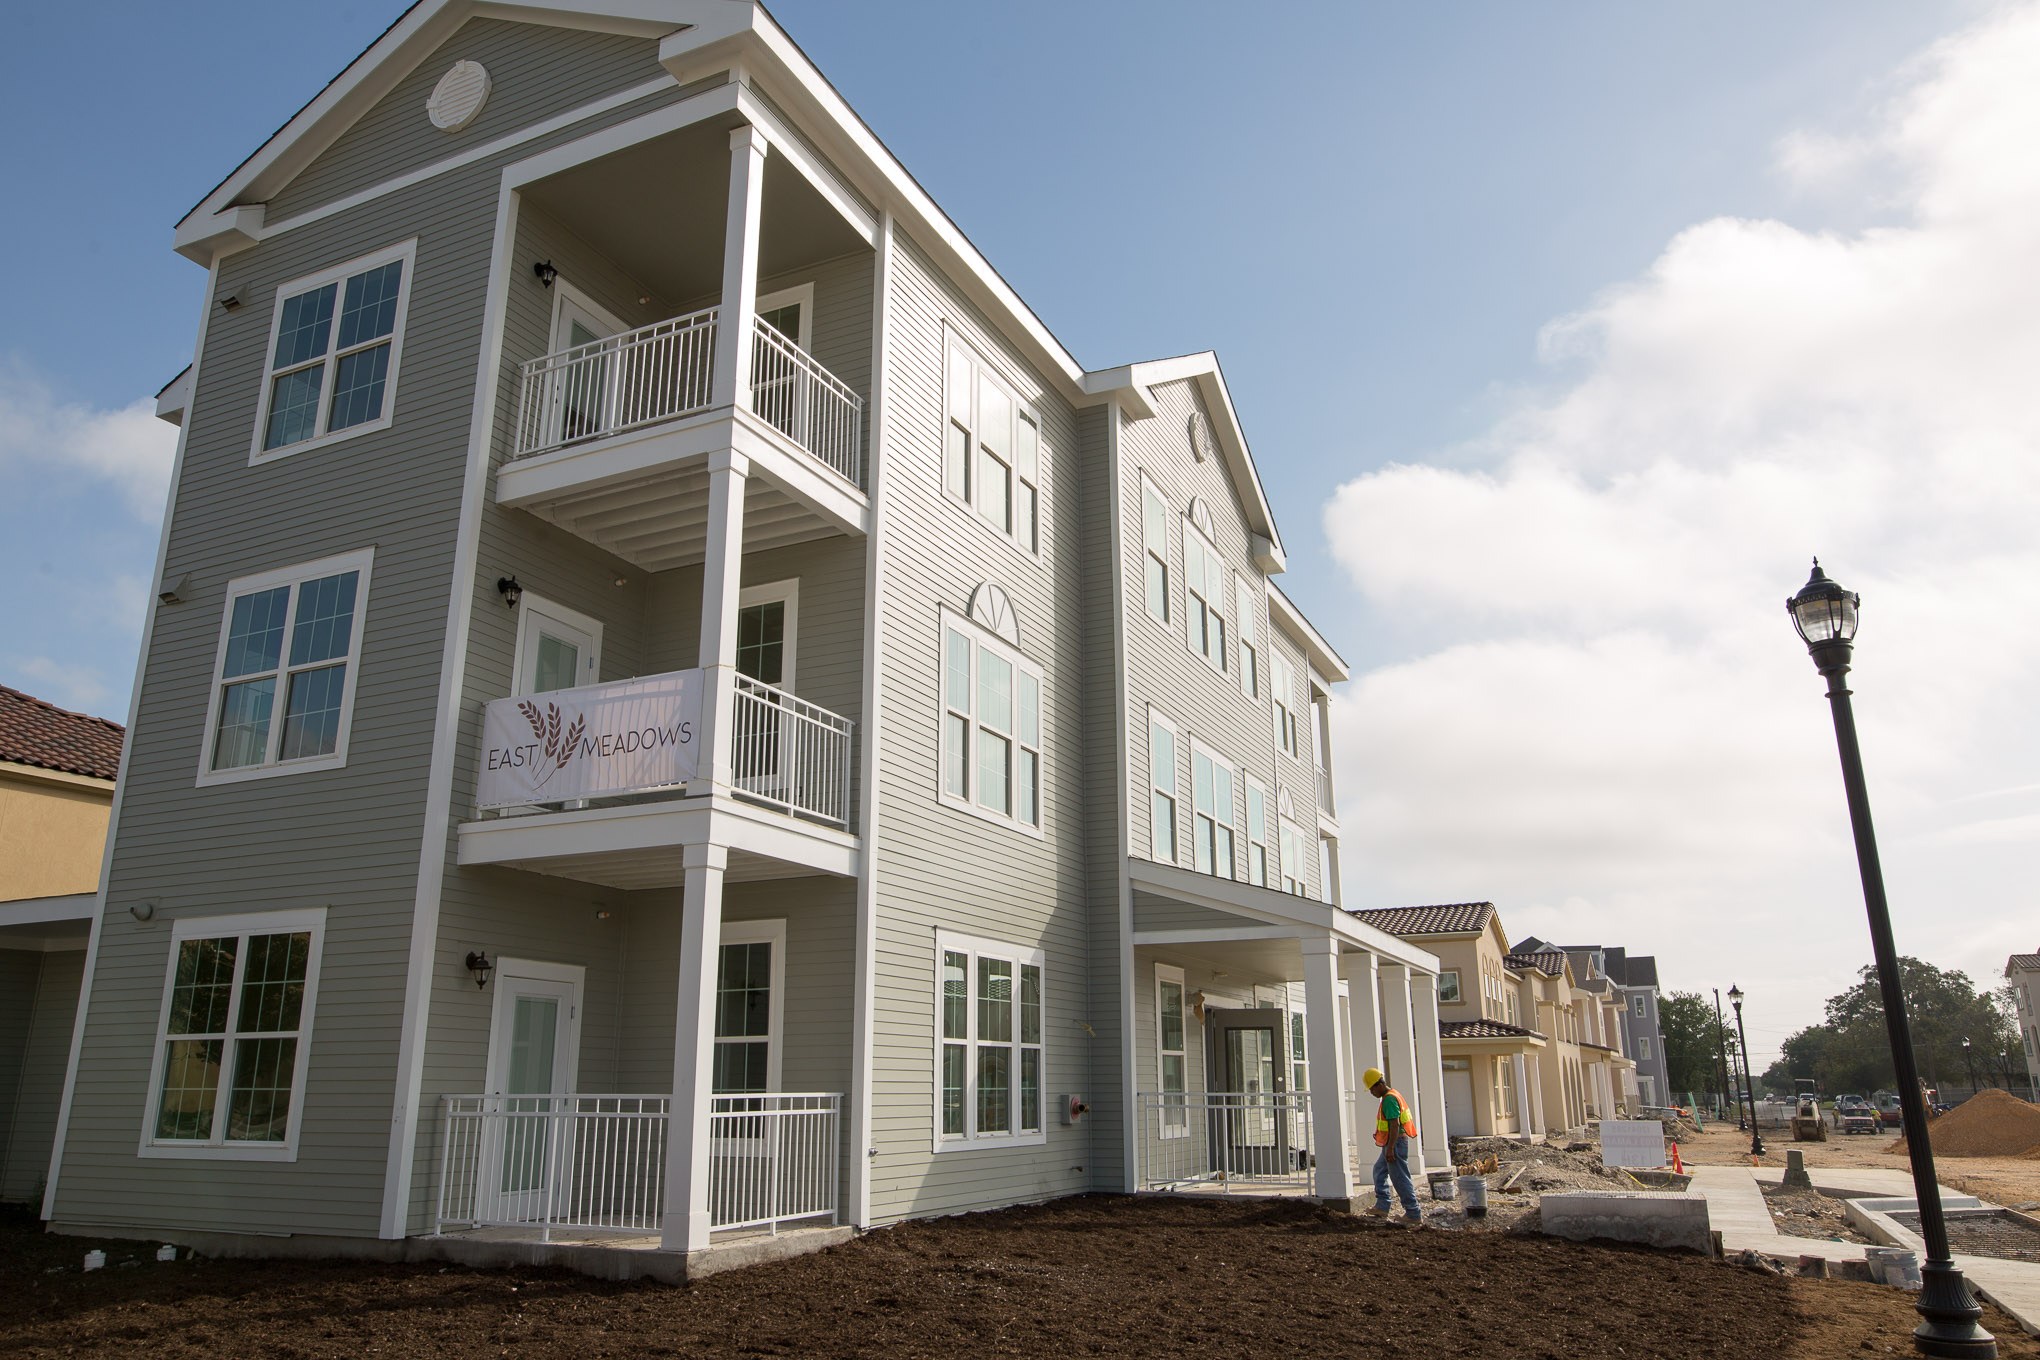 Affordable housing builds secure futures